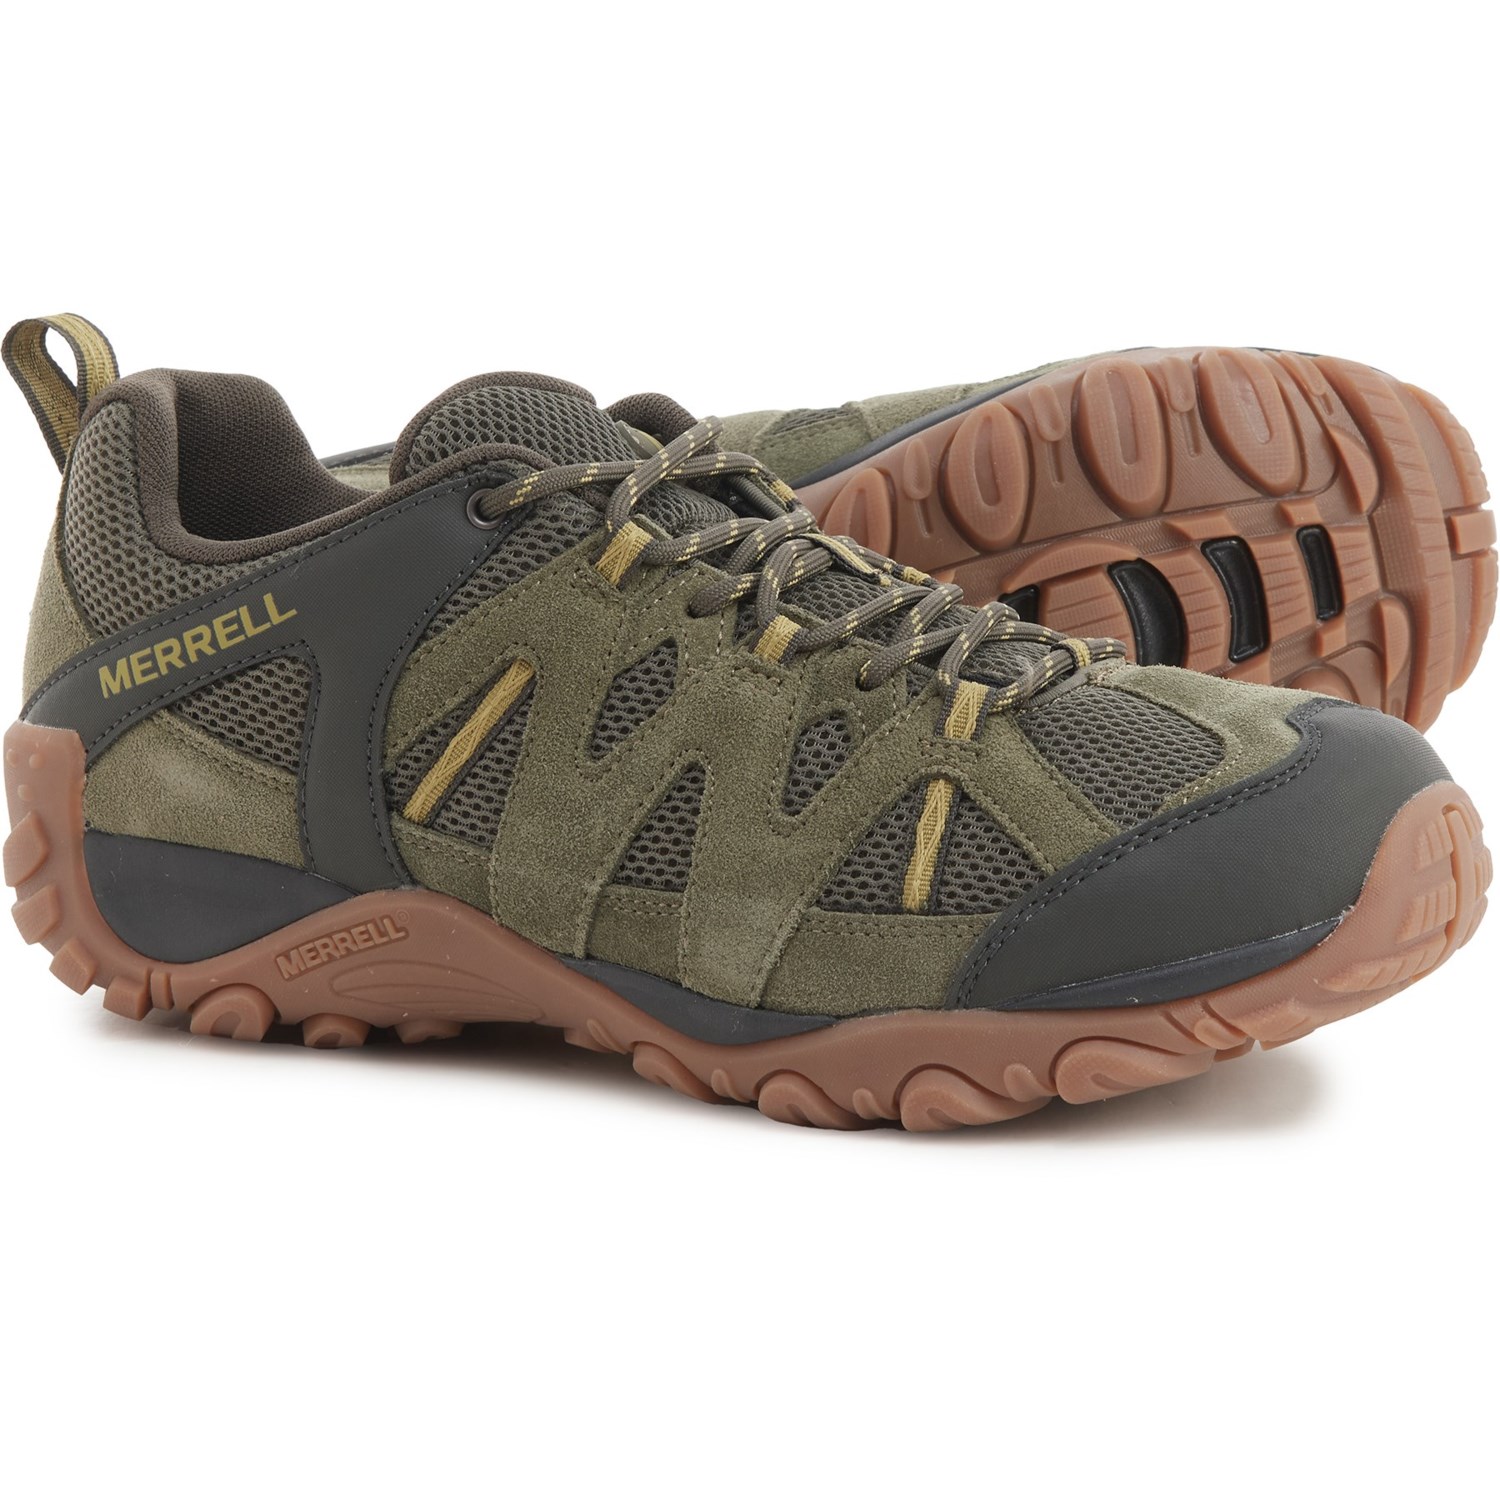 Merrell Deverta 2 Hiking Shoes (For Men) - Save 12%